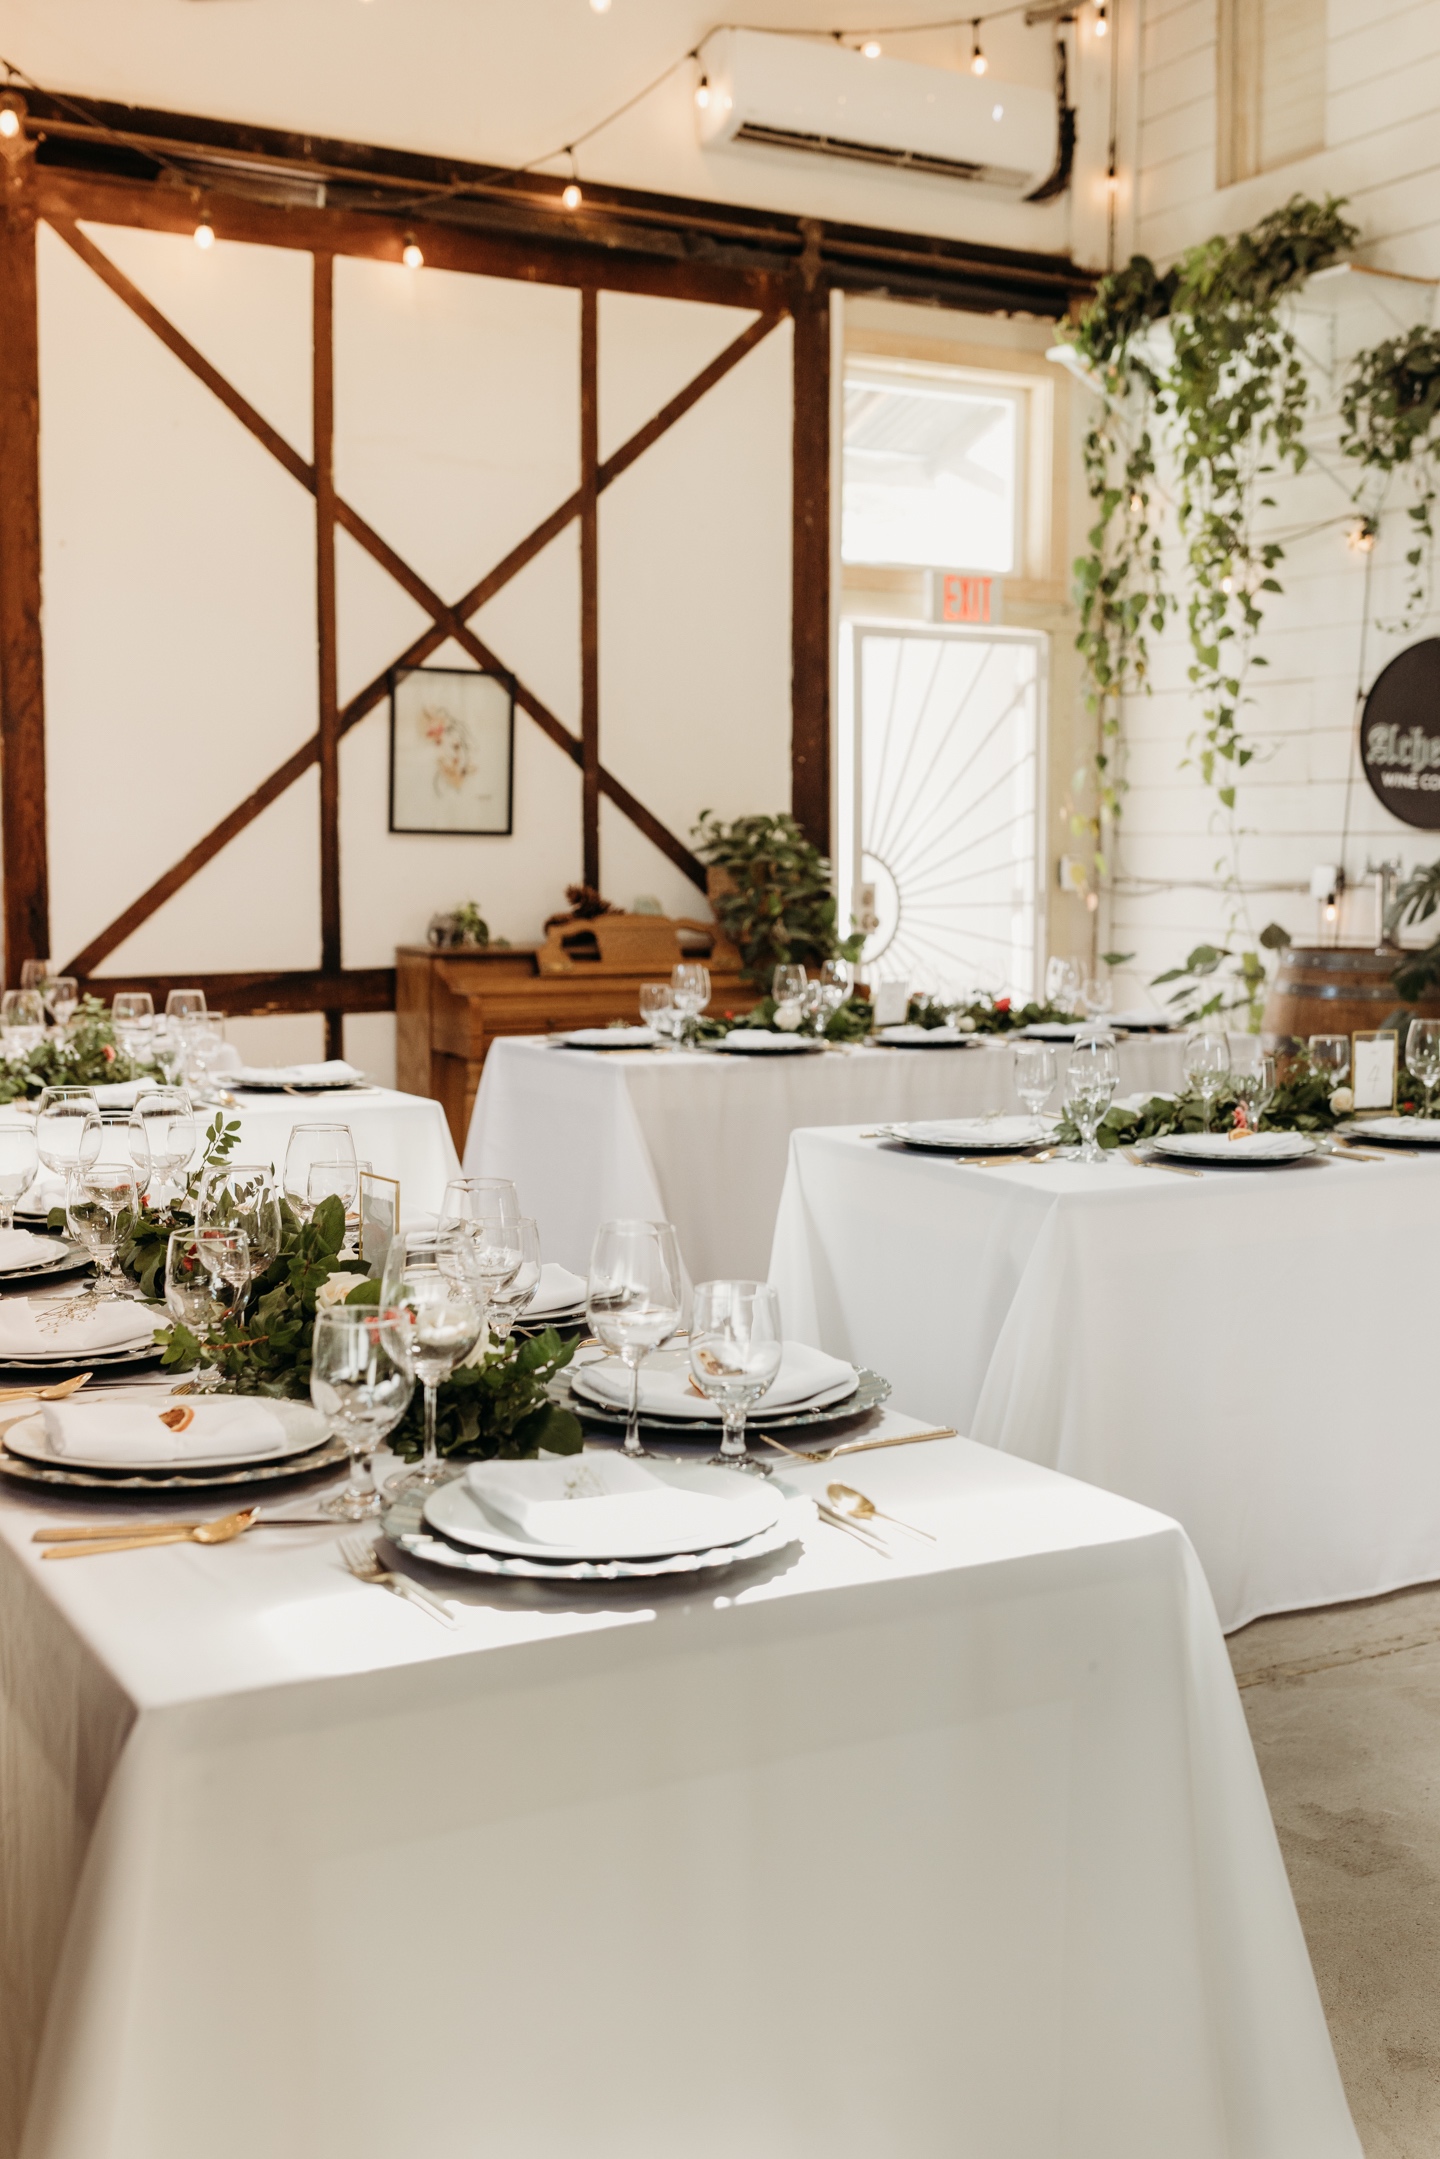 Table settings with white table cloths, green center pieces, and gold utensils. Liz Koston Photography.